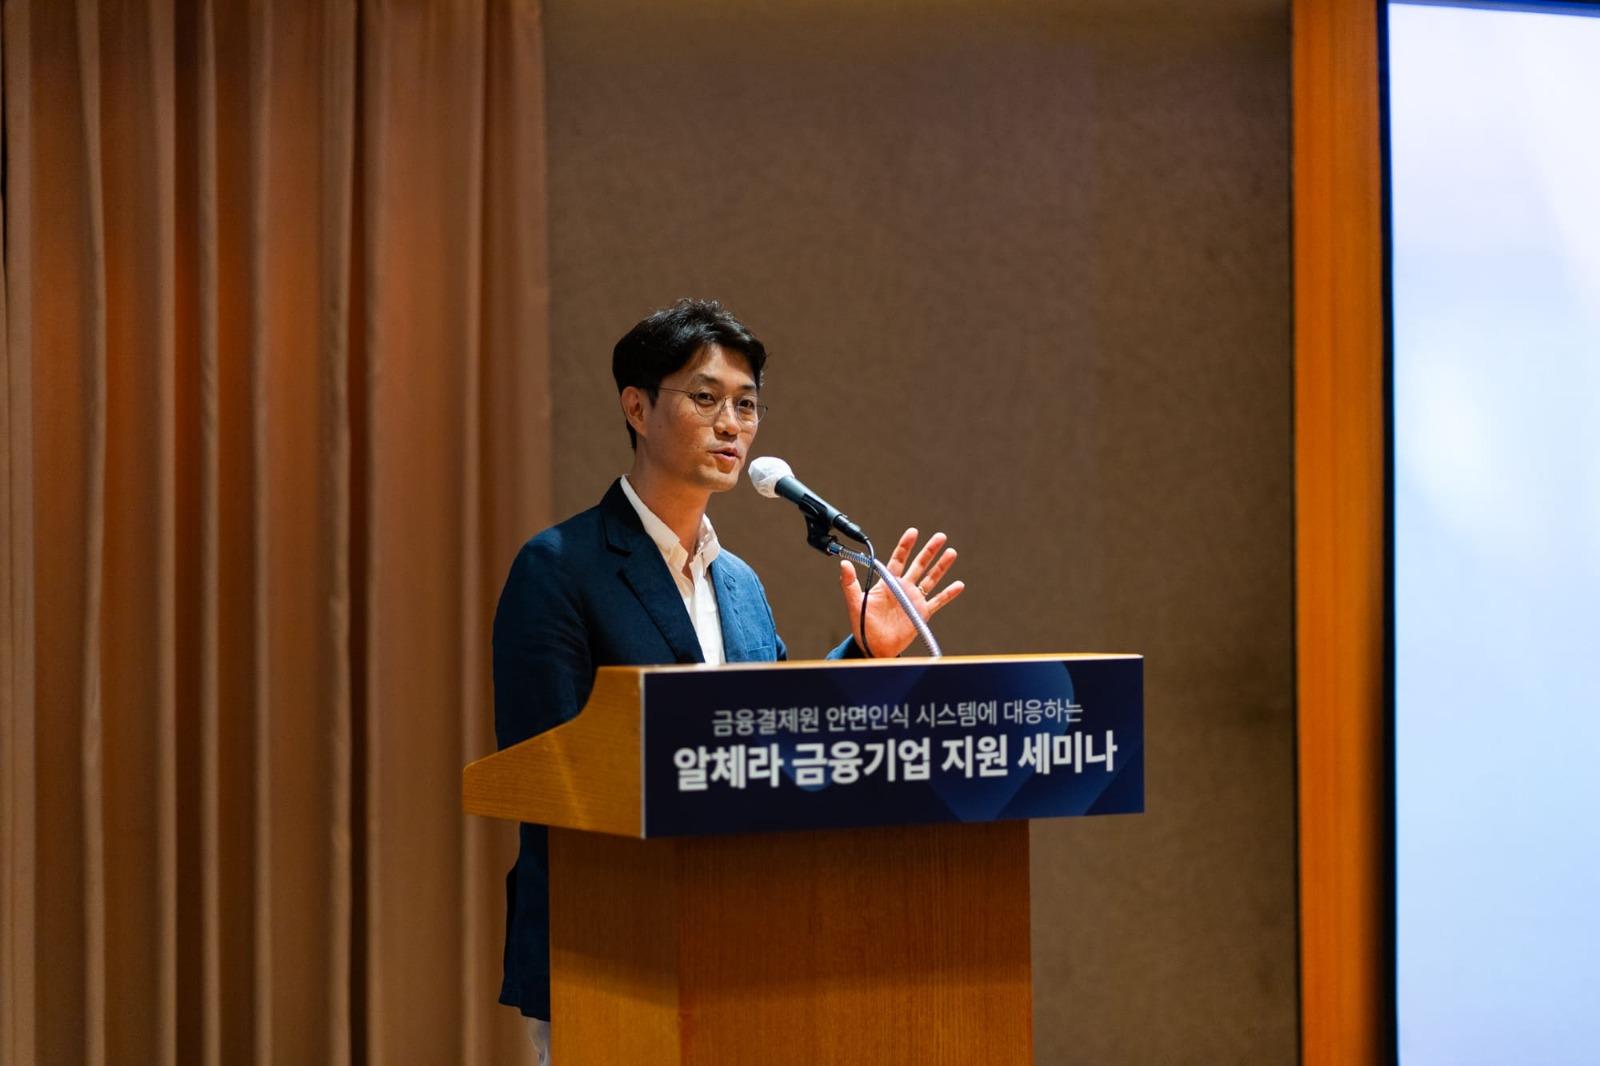 Hwang Yeong-gyu, CEO of Alchera, delivers a welcome speech at the ‘Financial Company Support Seminar’ (Image courtesy: Alchera)